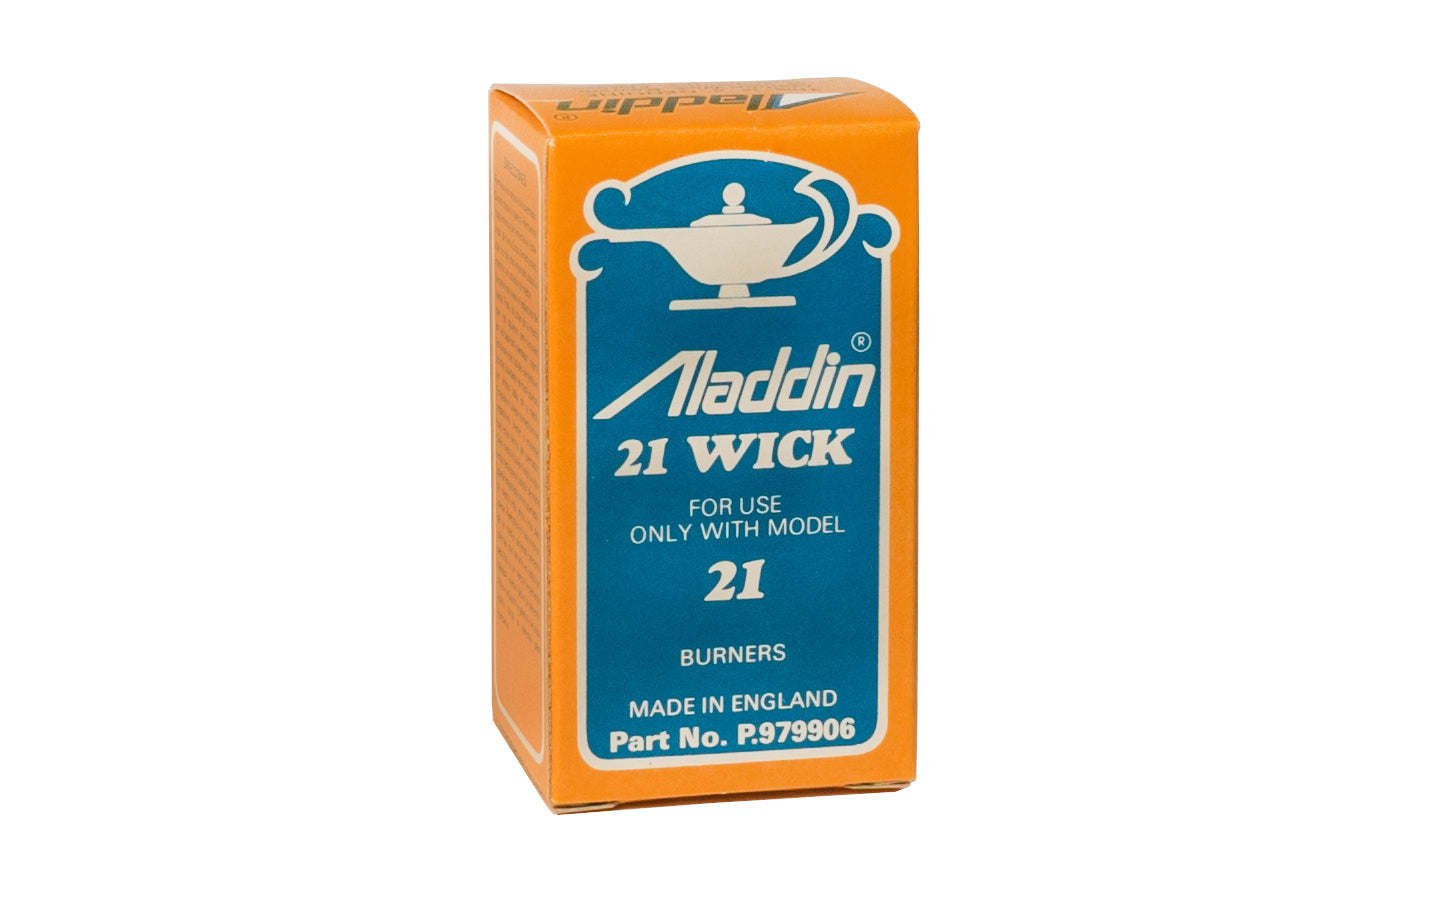 Aladdin #21 Lamp Wick ~ R199 ~ Made in England ~ The Aladdin #21 Lamp Wick is a quality lamp wick made by Aladdin Mantle Lamp Company. For use in models 21 & 21c lamp burners. Part No. P979906.